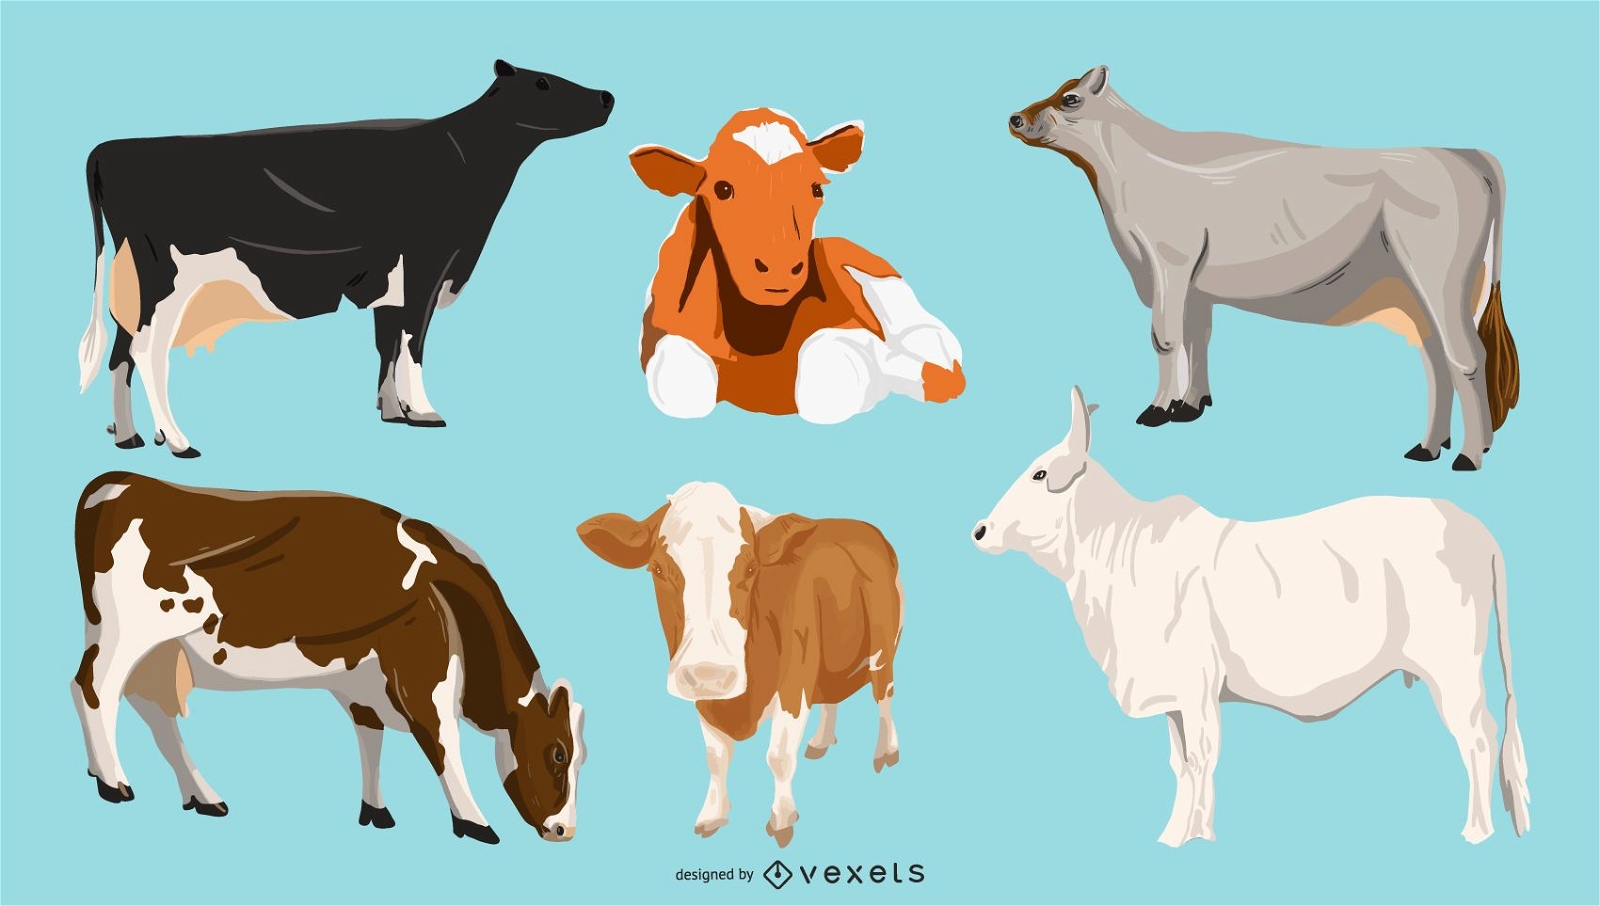 Cows illustration pack